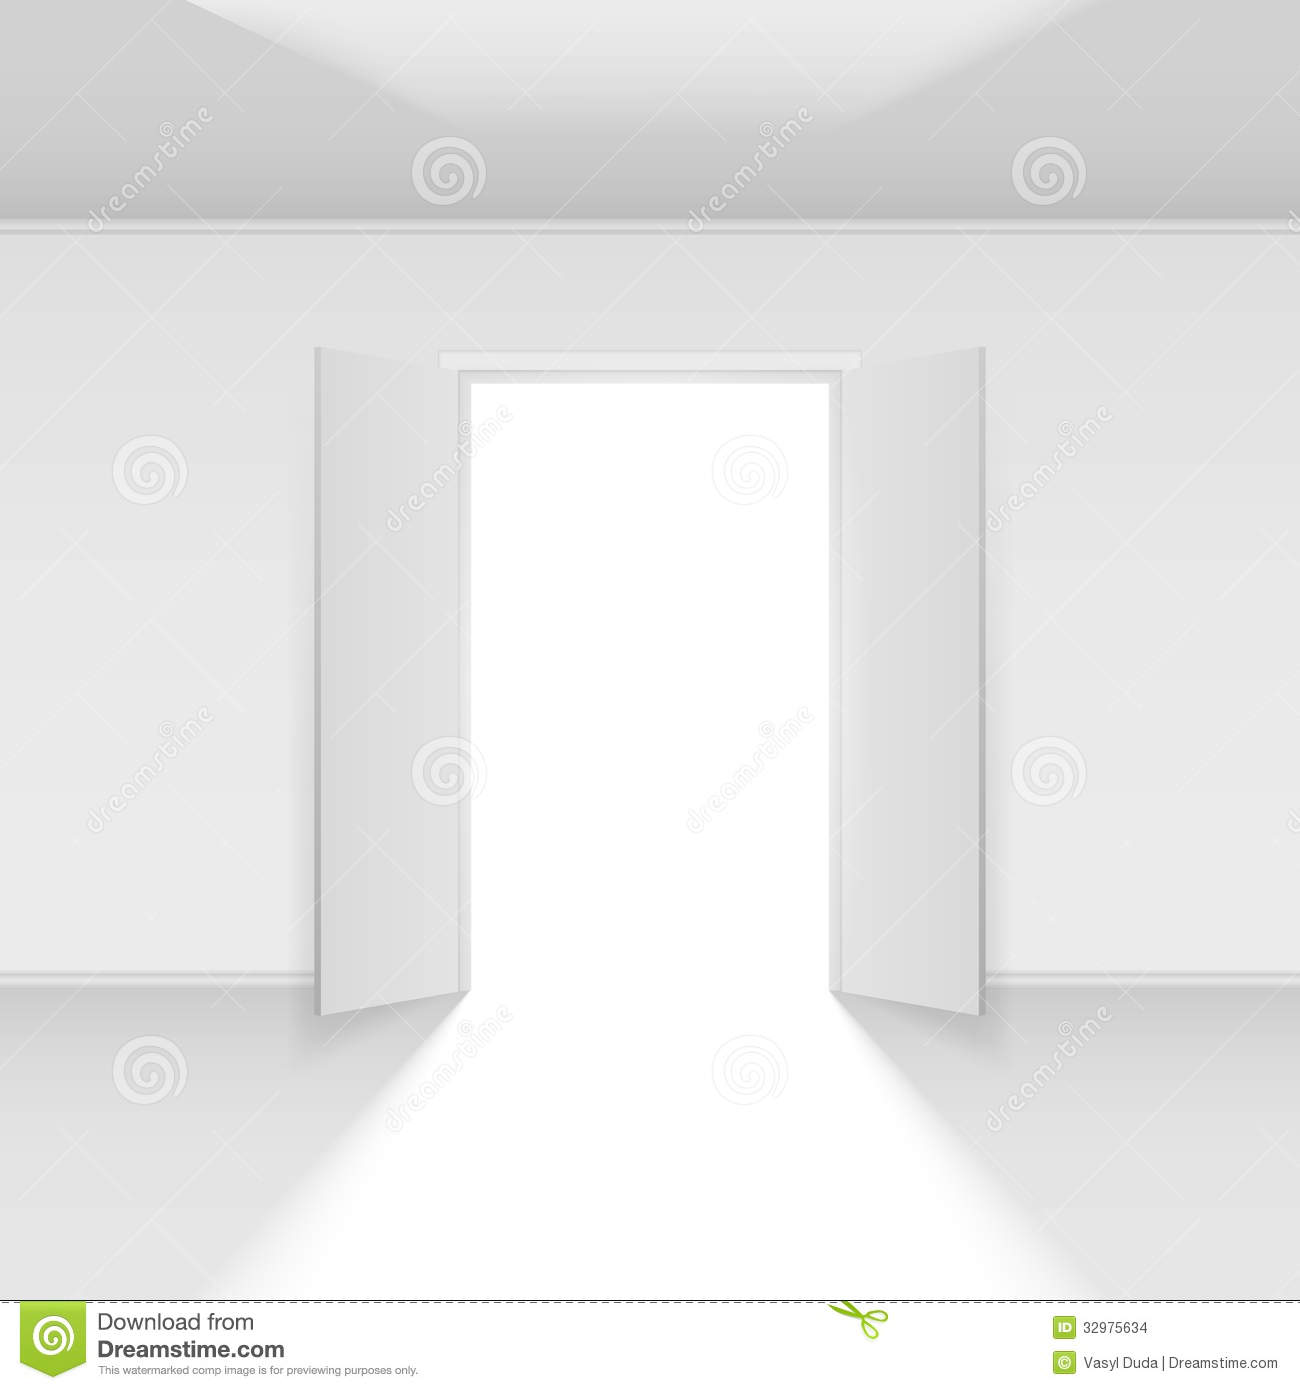 Double Open Door With Light  Illustration On Empty Background